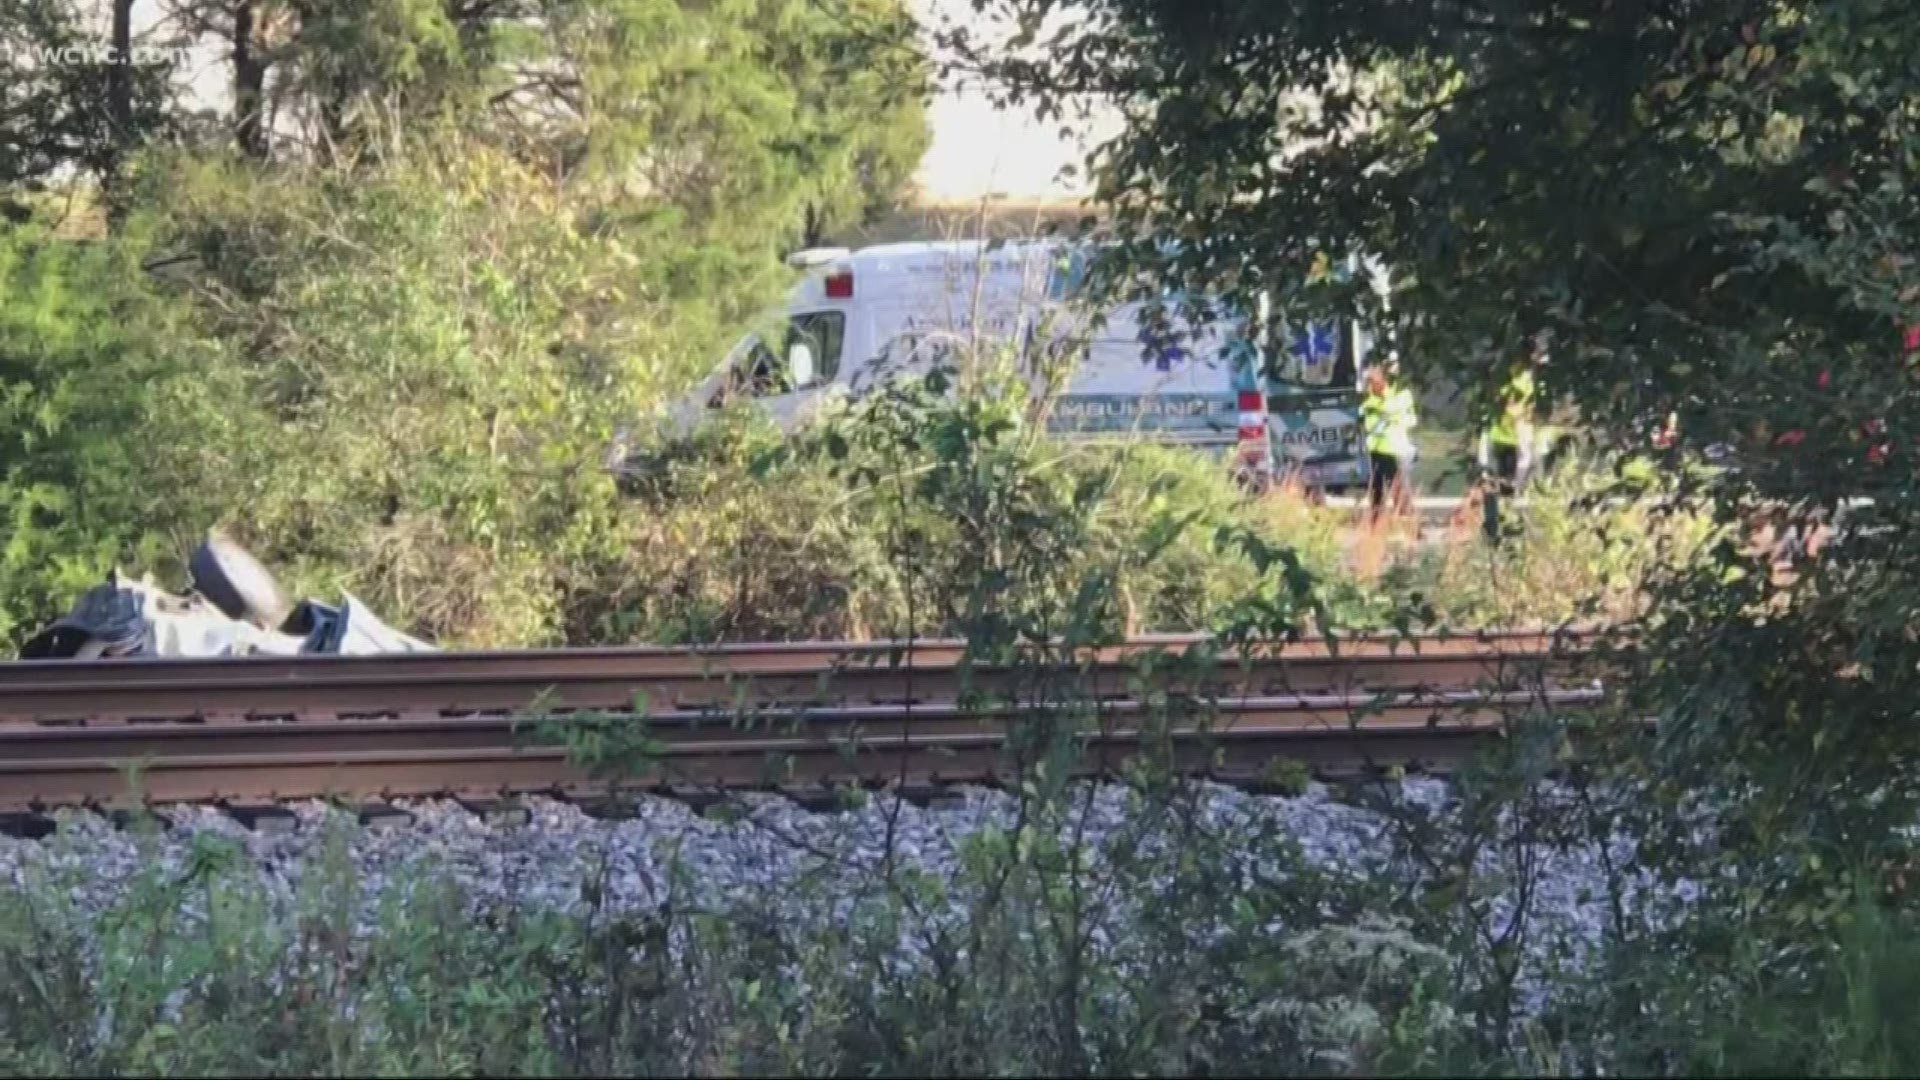 None of the passengers on the train were injured, officials said. The two killed were in the passenger vehicle, which overturned and was pushed down the tracks.